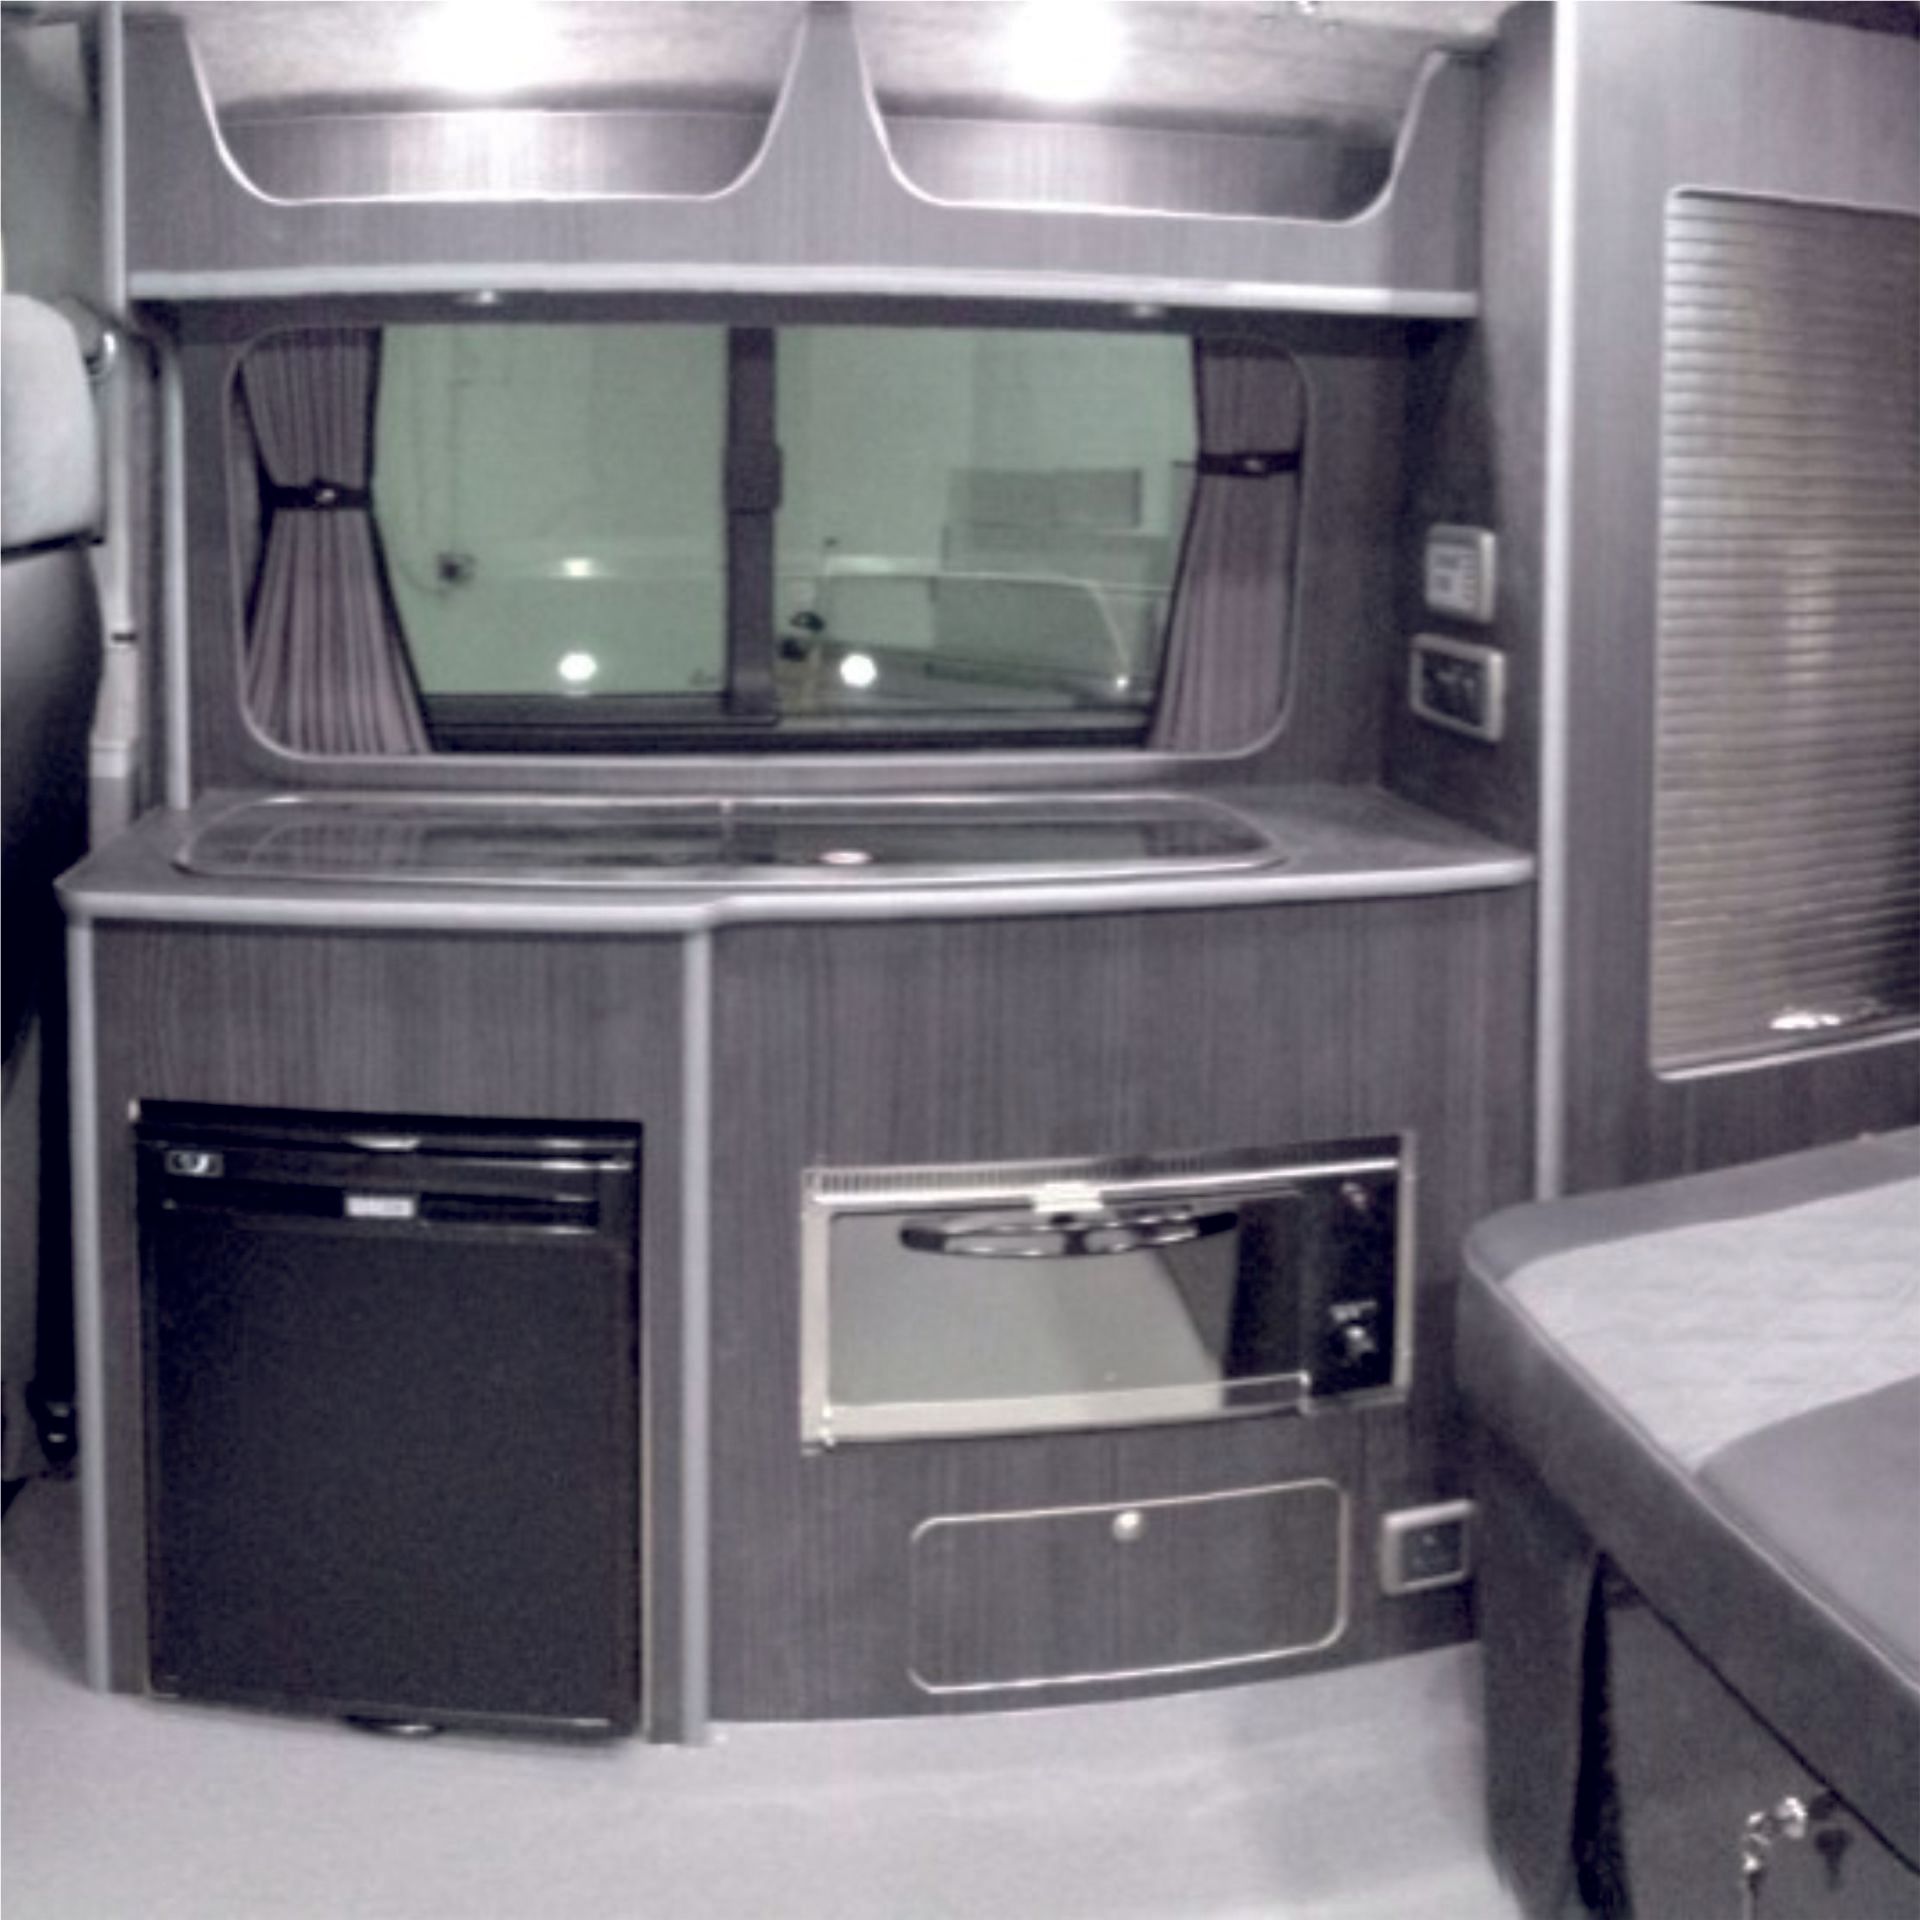 cooker and fridge units installed in a van